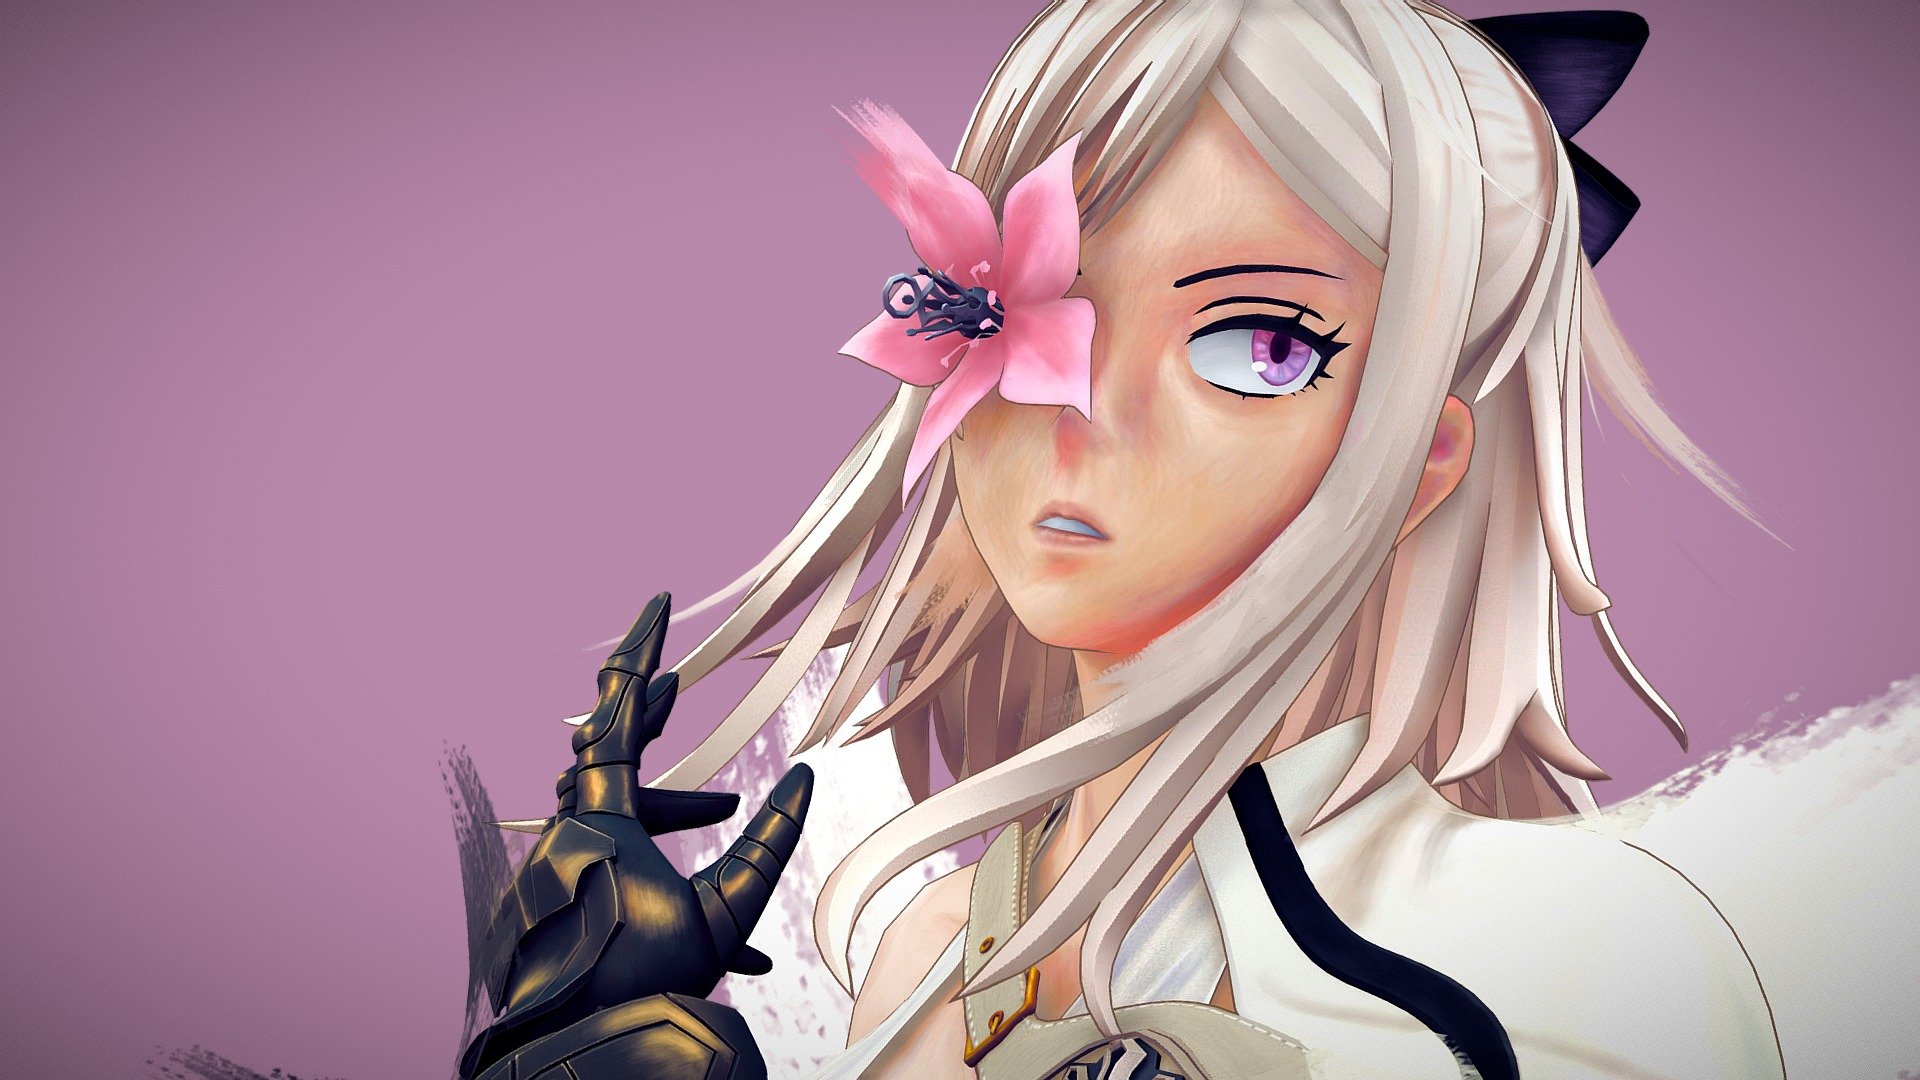 Main protagonist from the game Drakengard 3 (Drag-on dragoon 3)

Modeling in 3Ds max.

Handpainted texturing using Substance Painter and 3D Coat - Zero - Drakengard 3 - 3D model by Naxyo 3d model